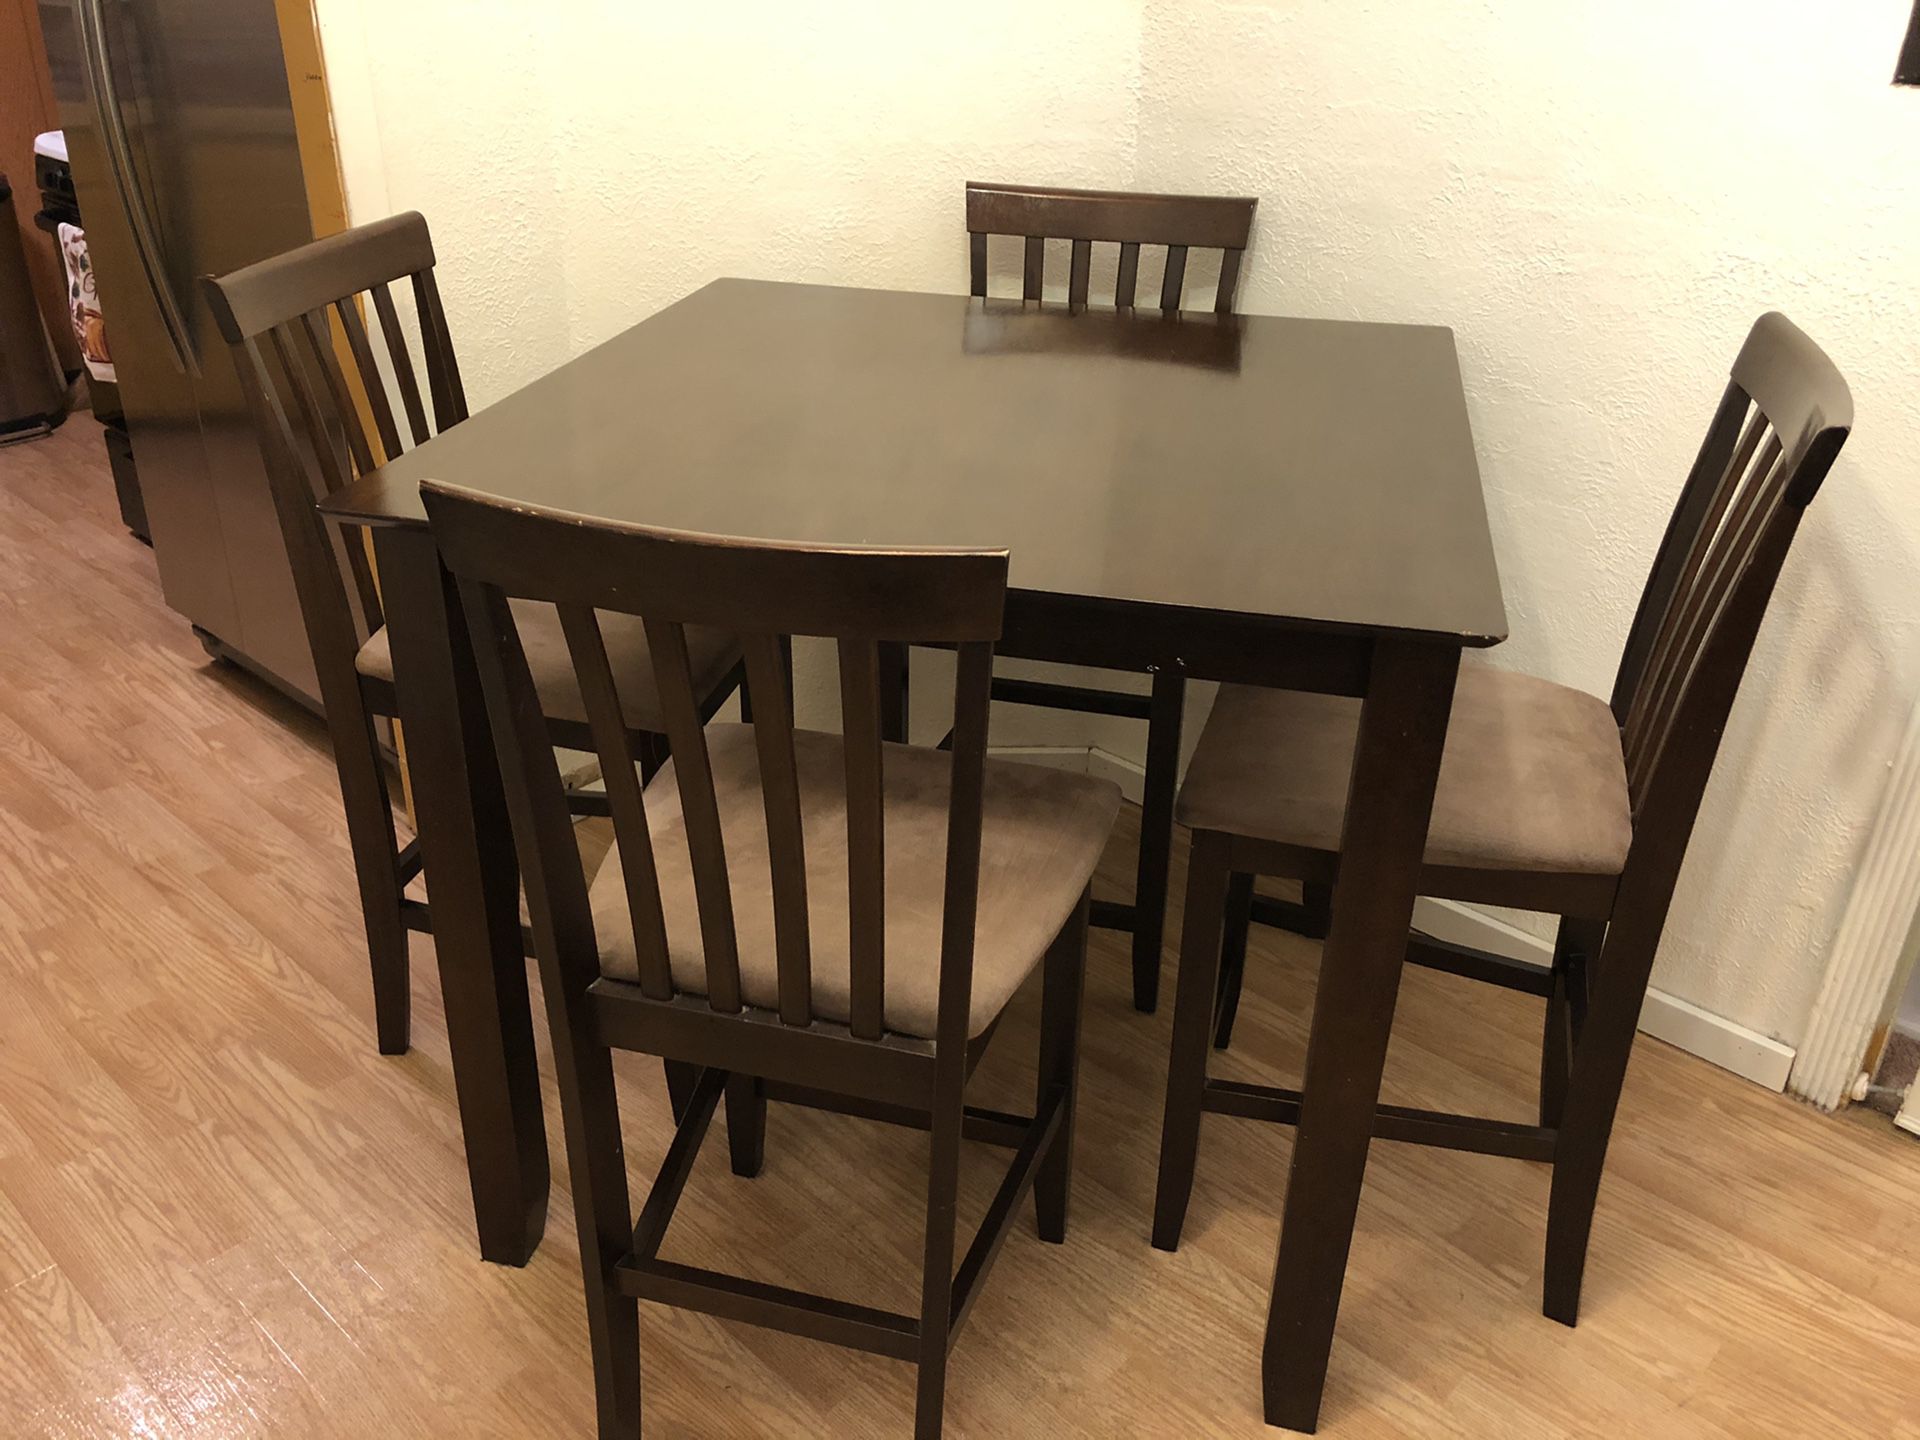 $150 - Counter Height 4 Seat Kitchen Table (Used)